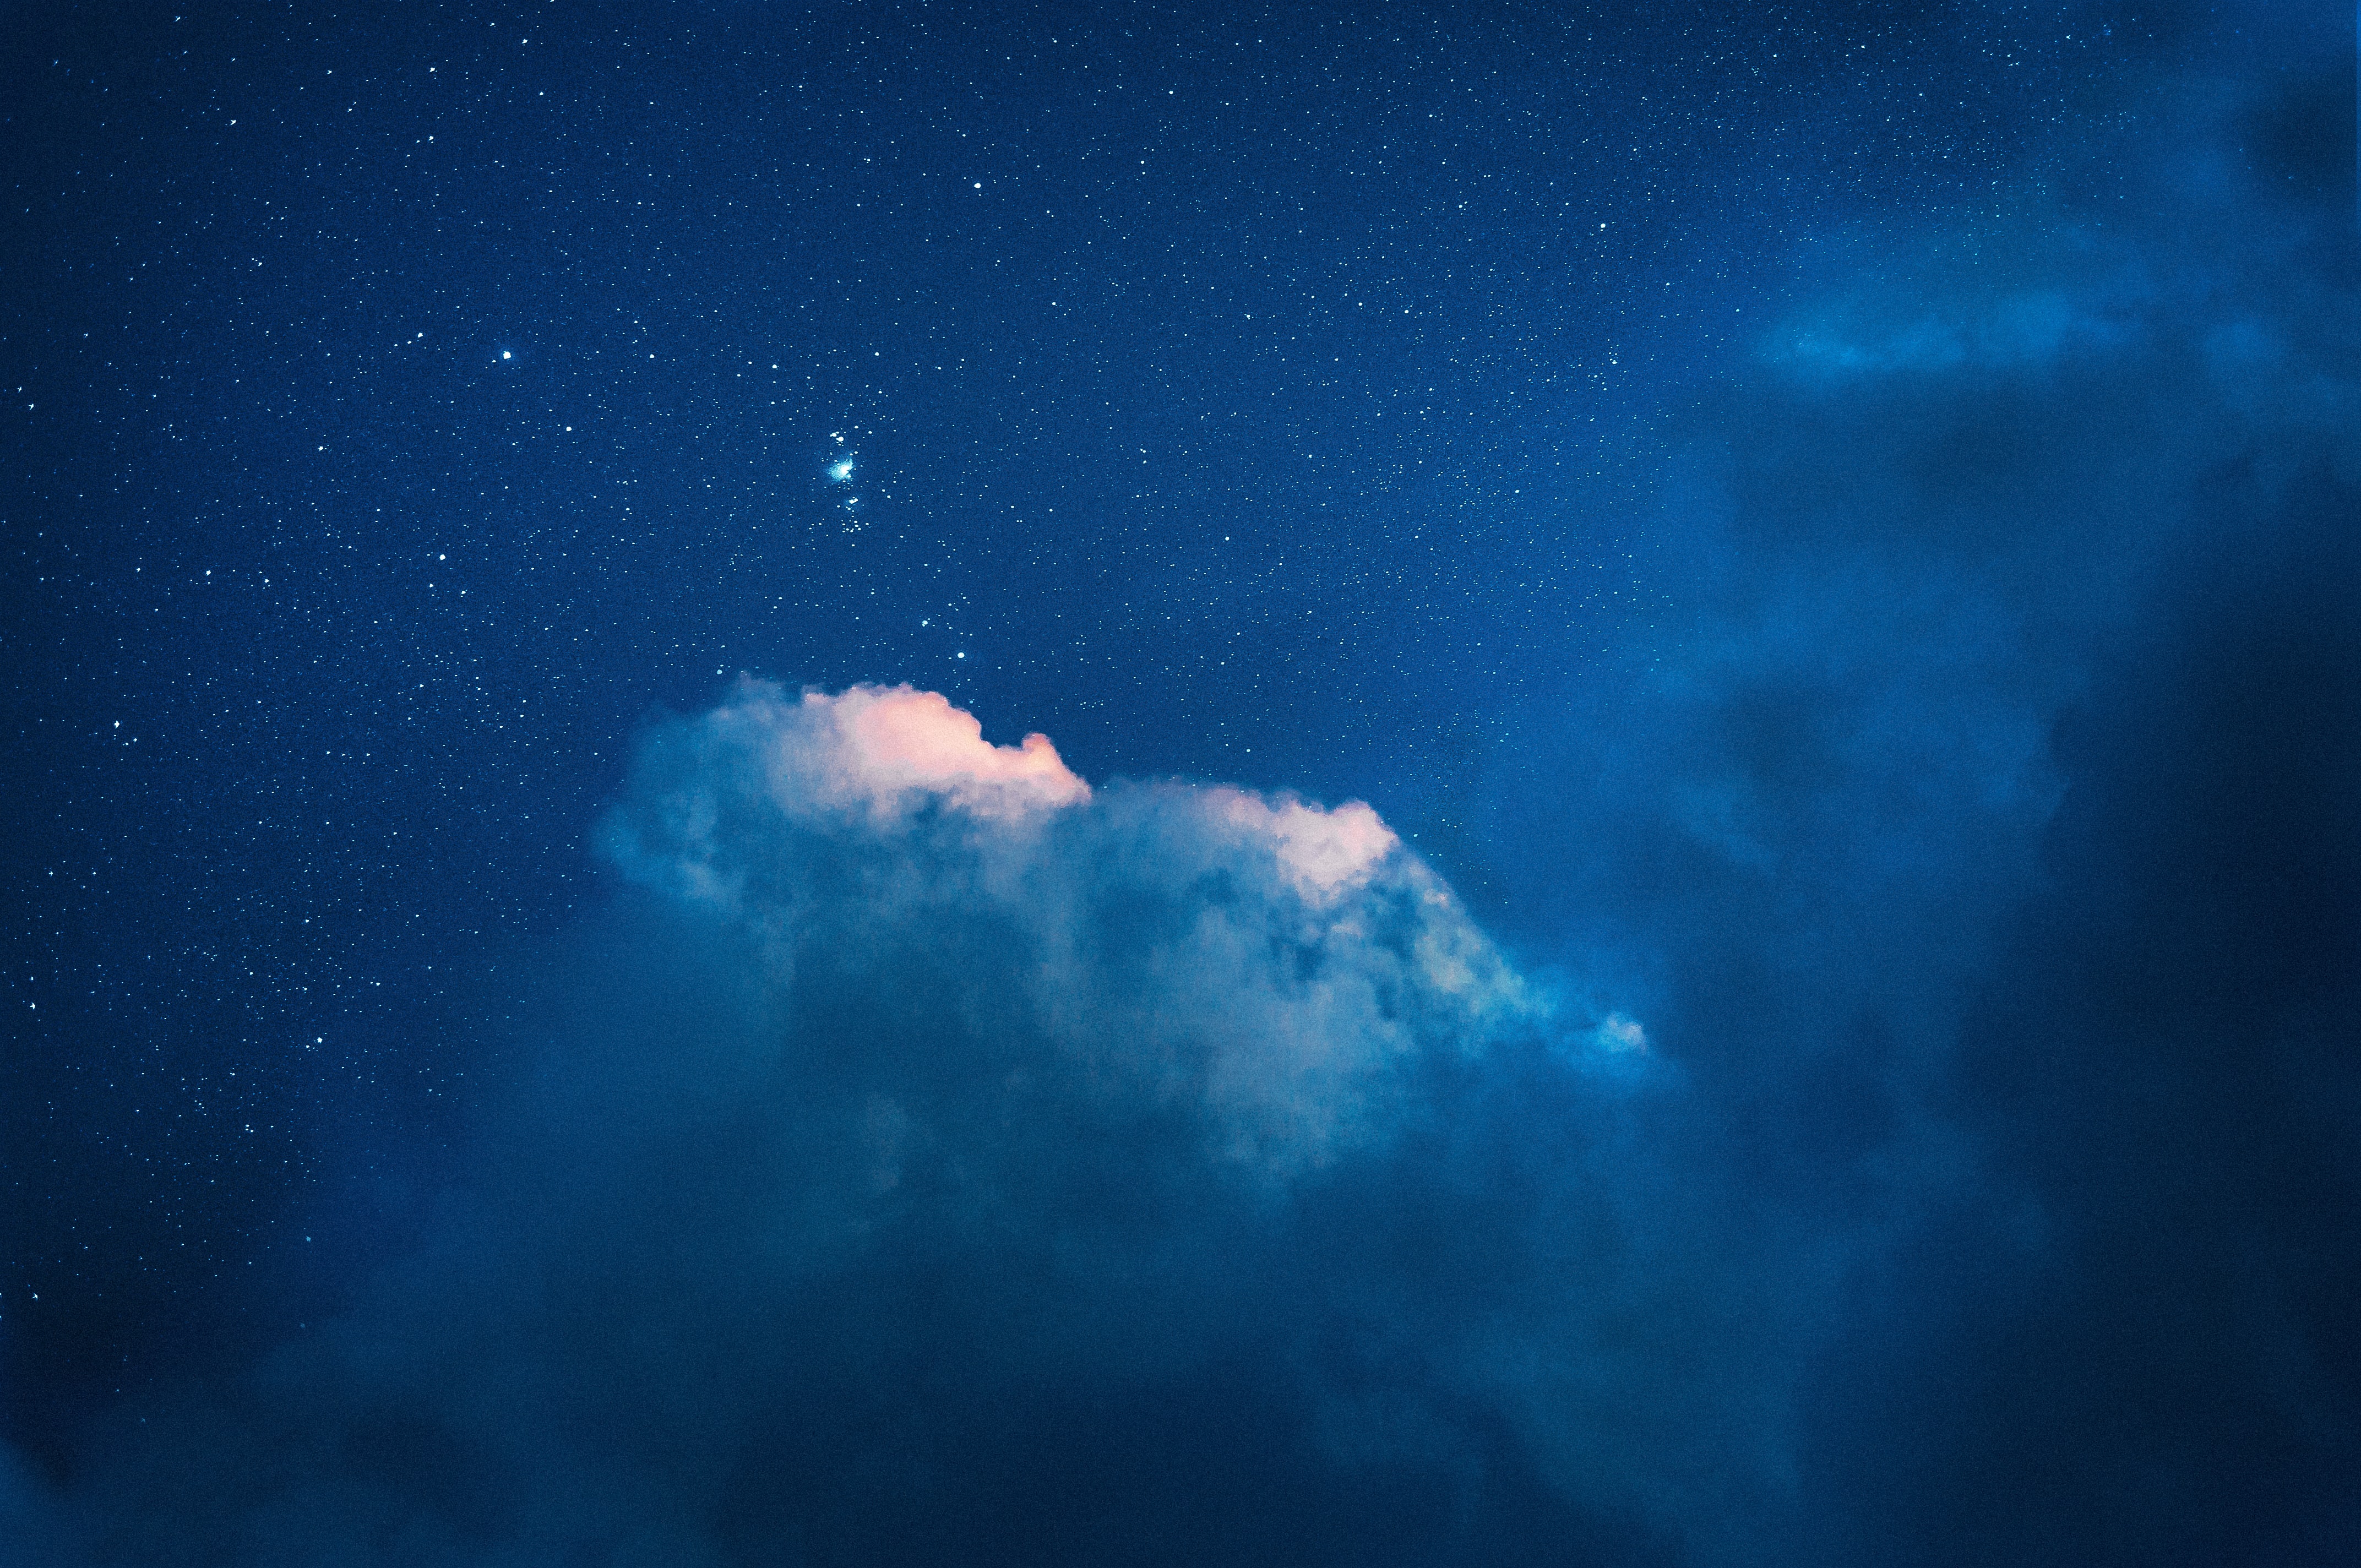 https://4kwallpapers.com/images/wallpapers/starry-sky-clouds-blue-sky-night-4288x2848-1094.jpg